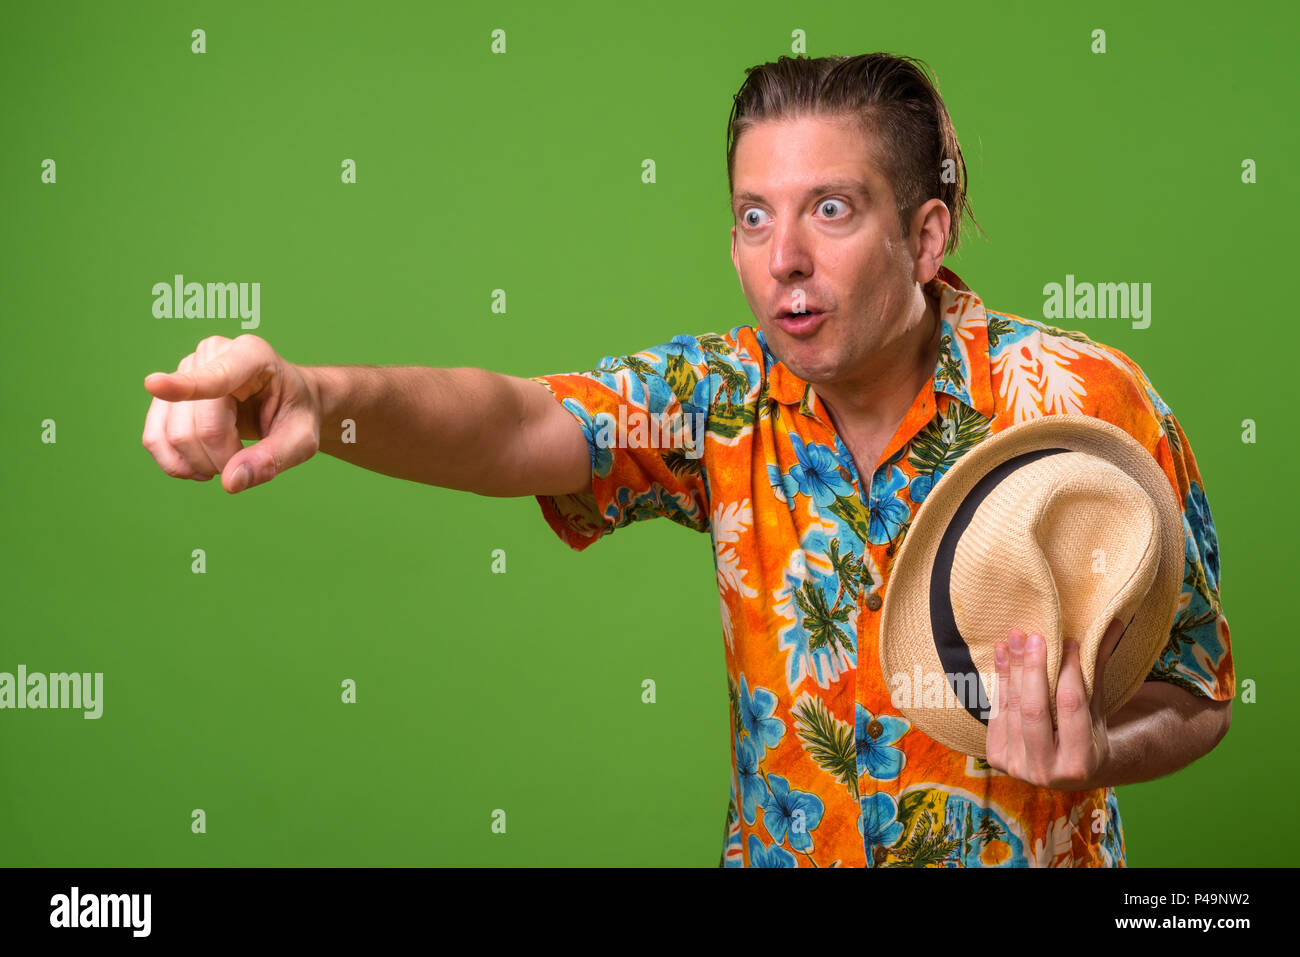 Mature tourist man ready for vacation against green background Stock Photo